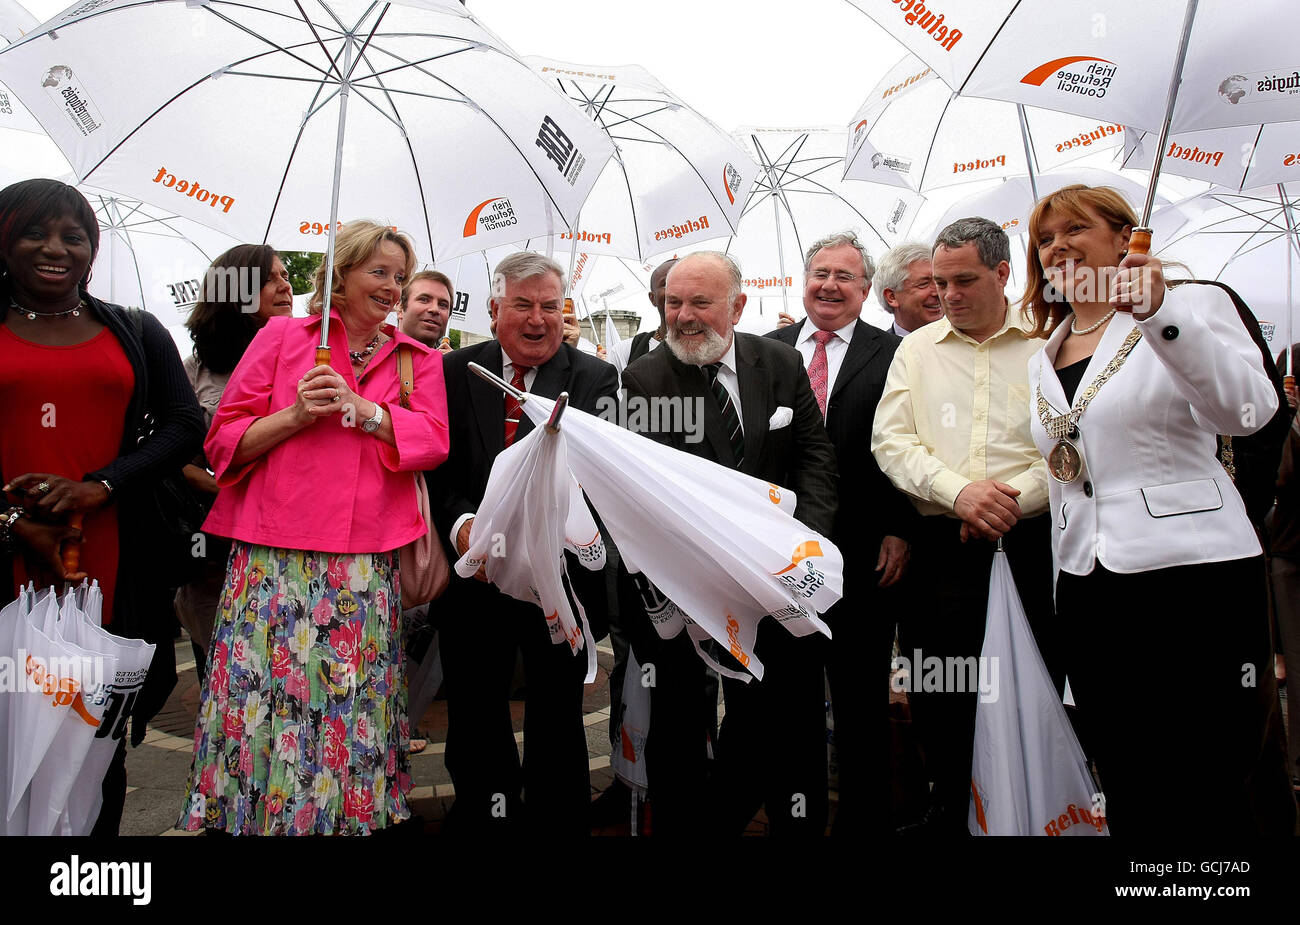 Senator David Norris (centre left) and Senator Terry Leyden (centre right) duel with umbrellas, watched by Dublin Lord Mayor Emer Costello (right) under umbrellas at an event held by the Irish Refugee Council on Grafton Street, Dublin, to mark World Refugee Day. Stock Photo